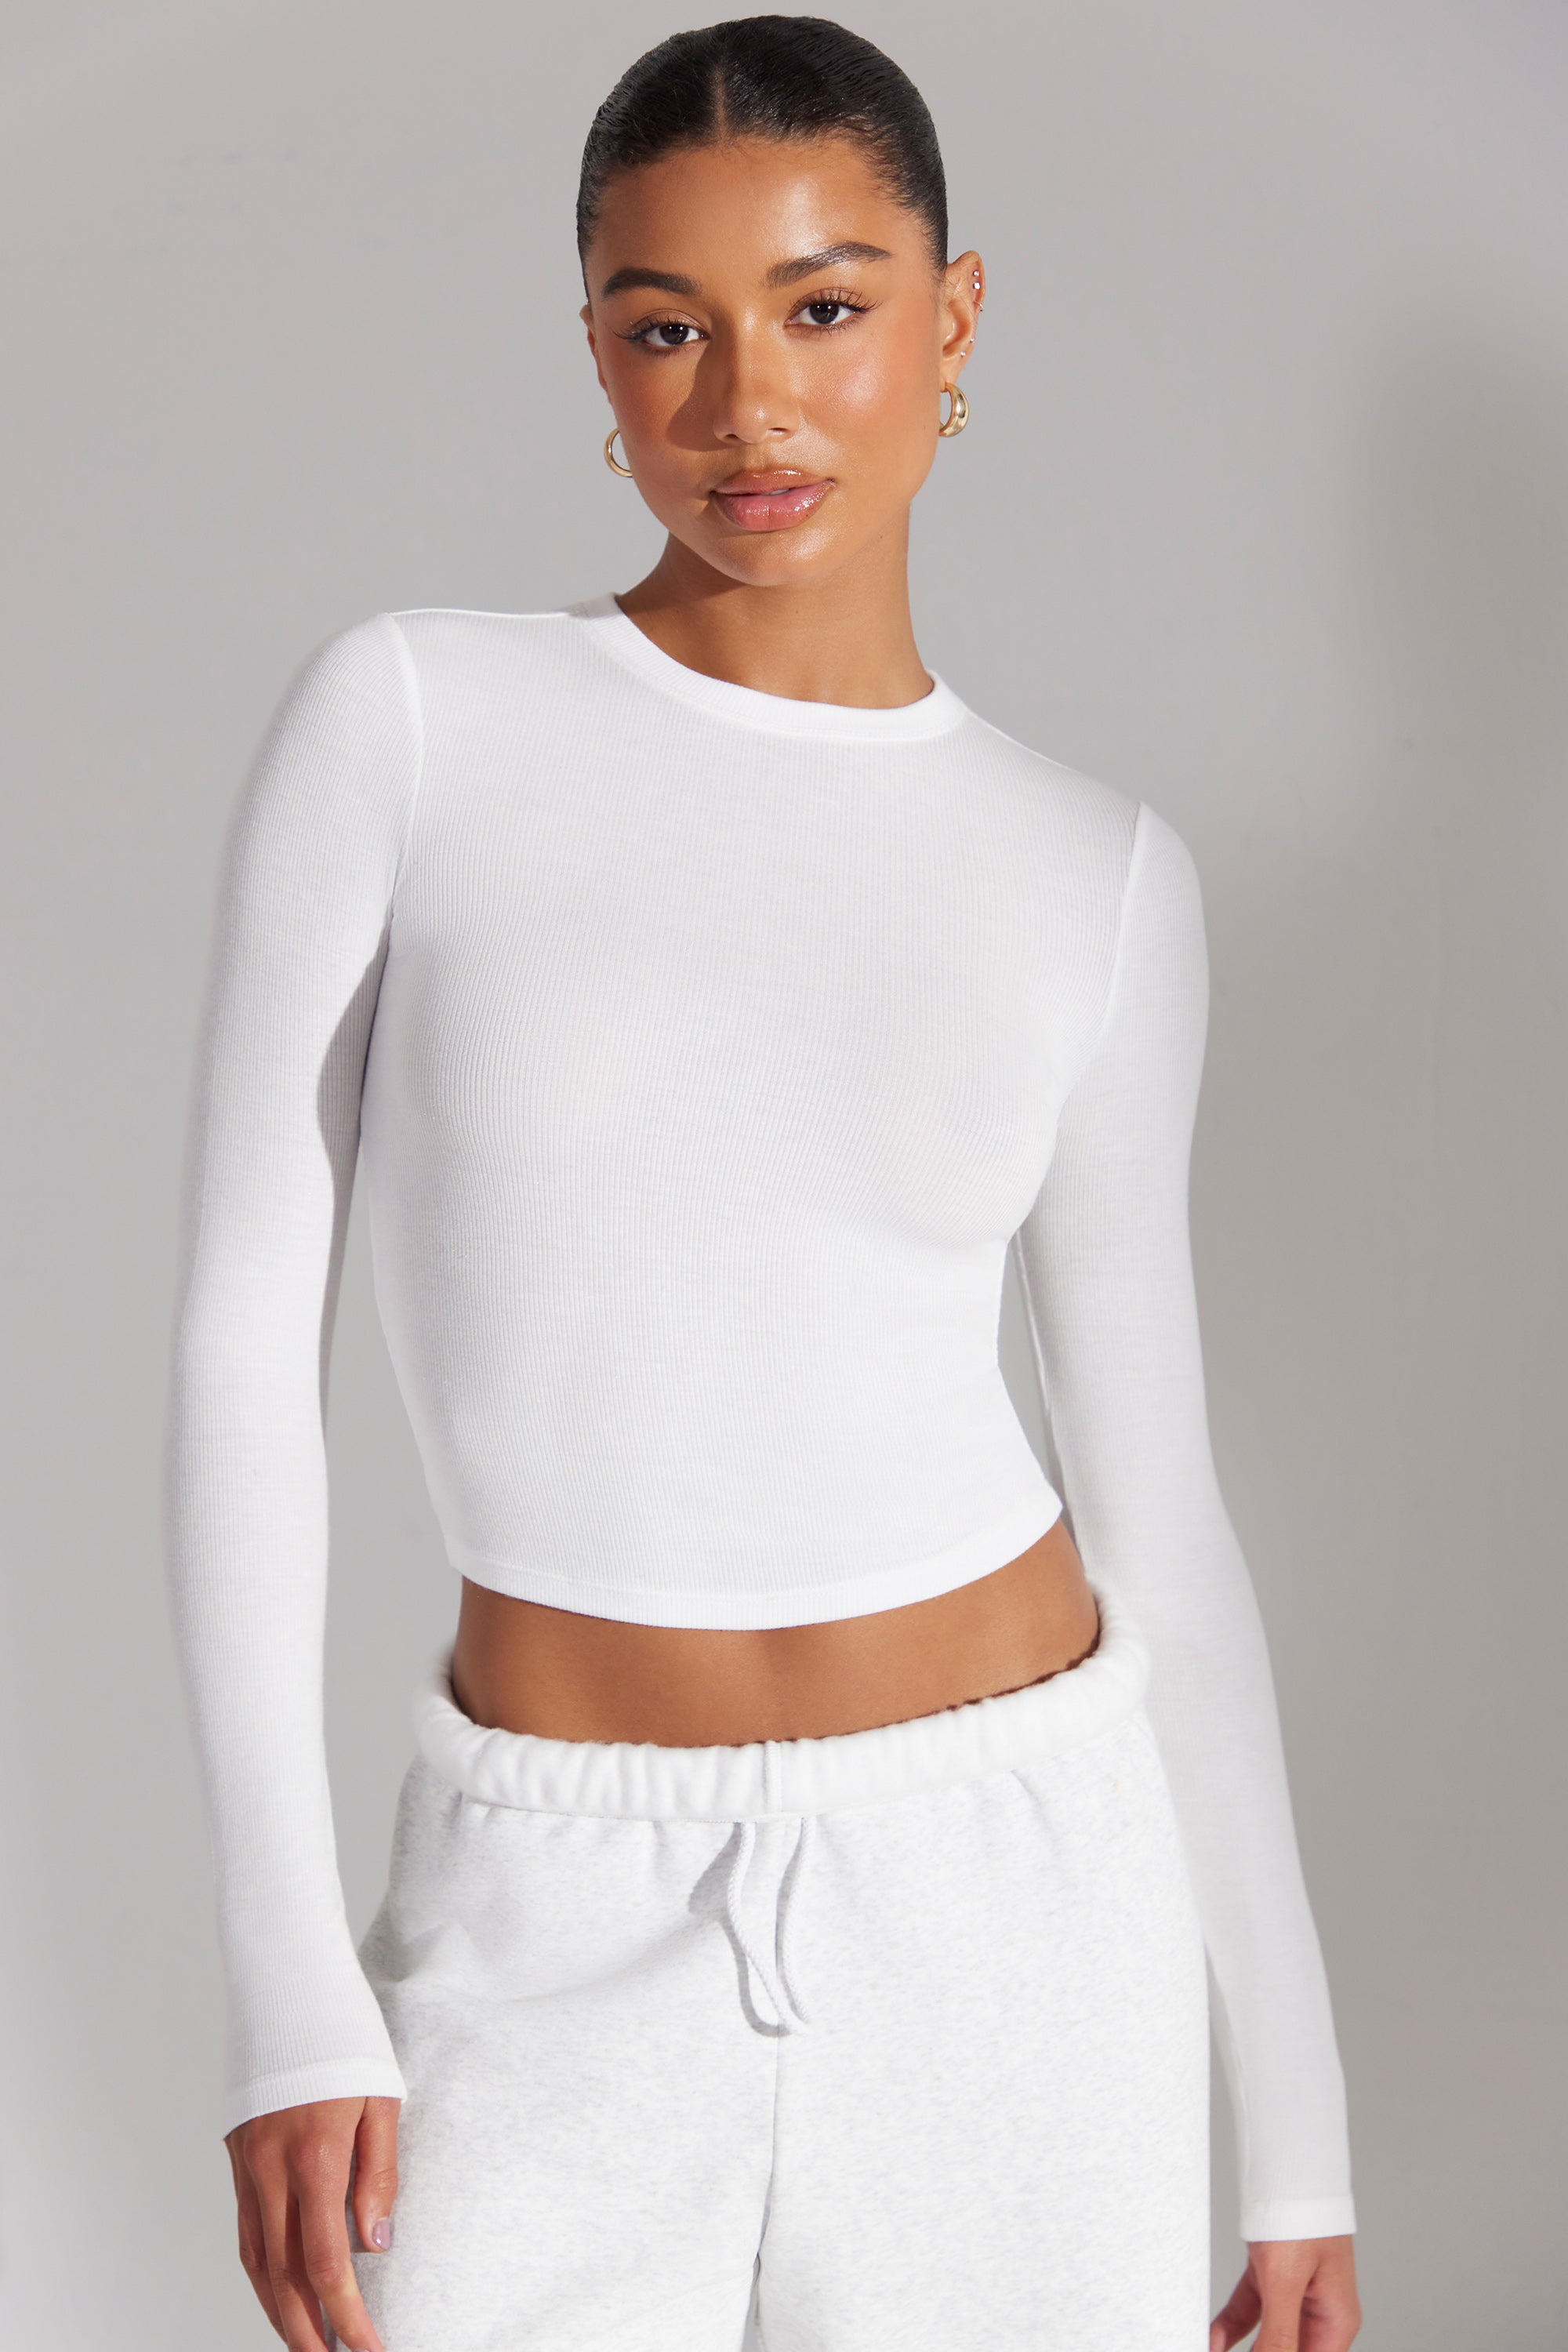 Elementary High Neck Long Sleeve Top in White | Oh Polly